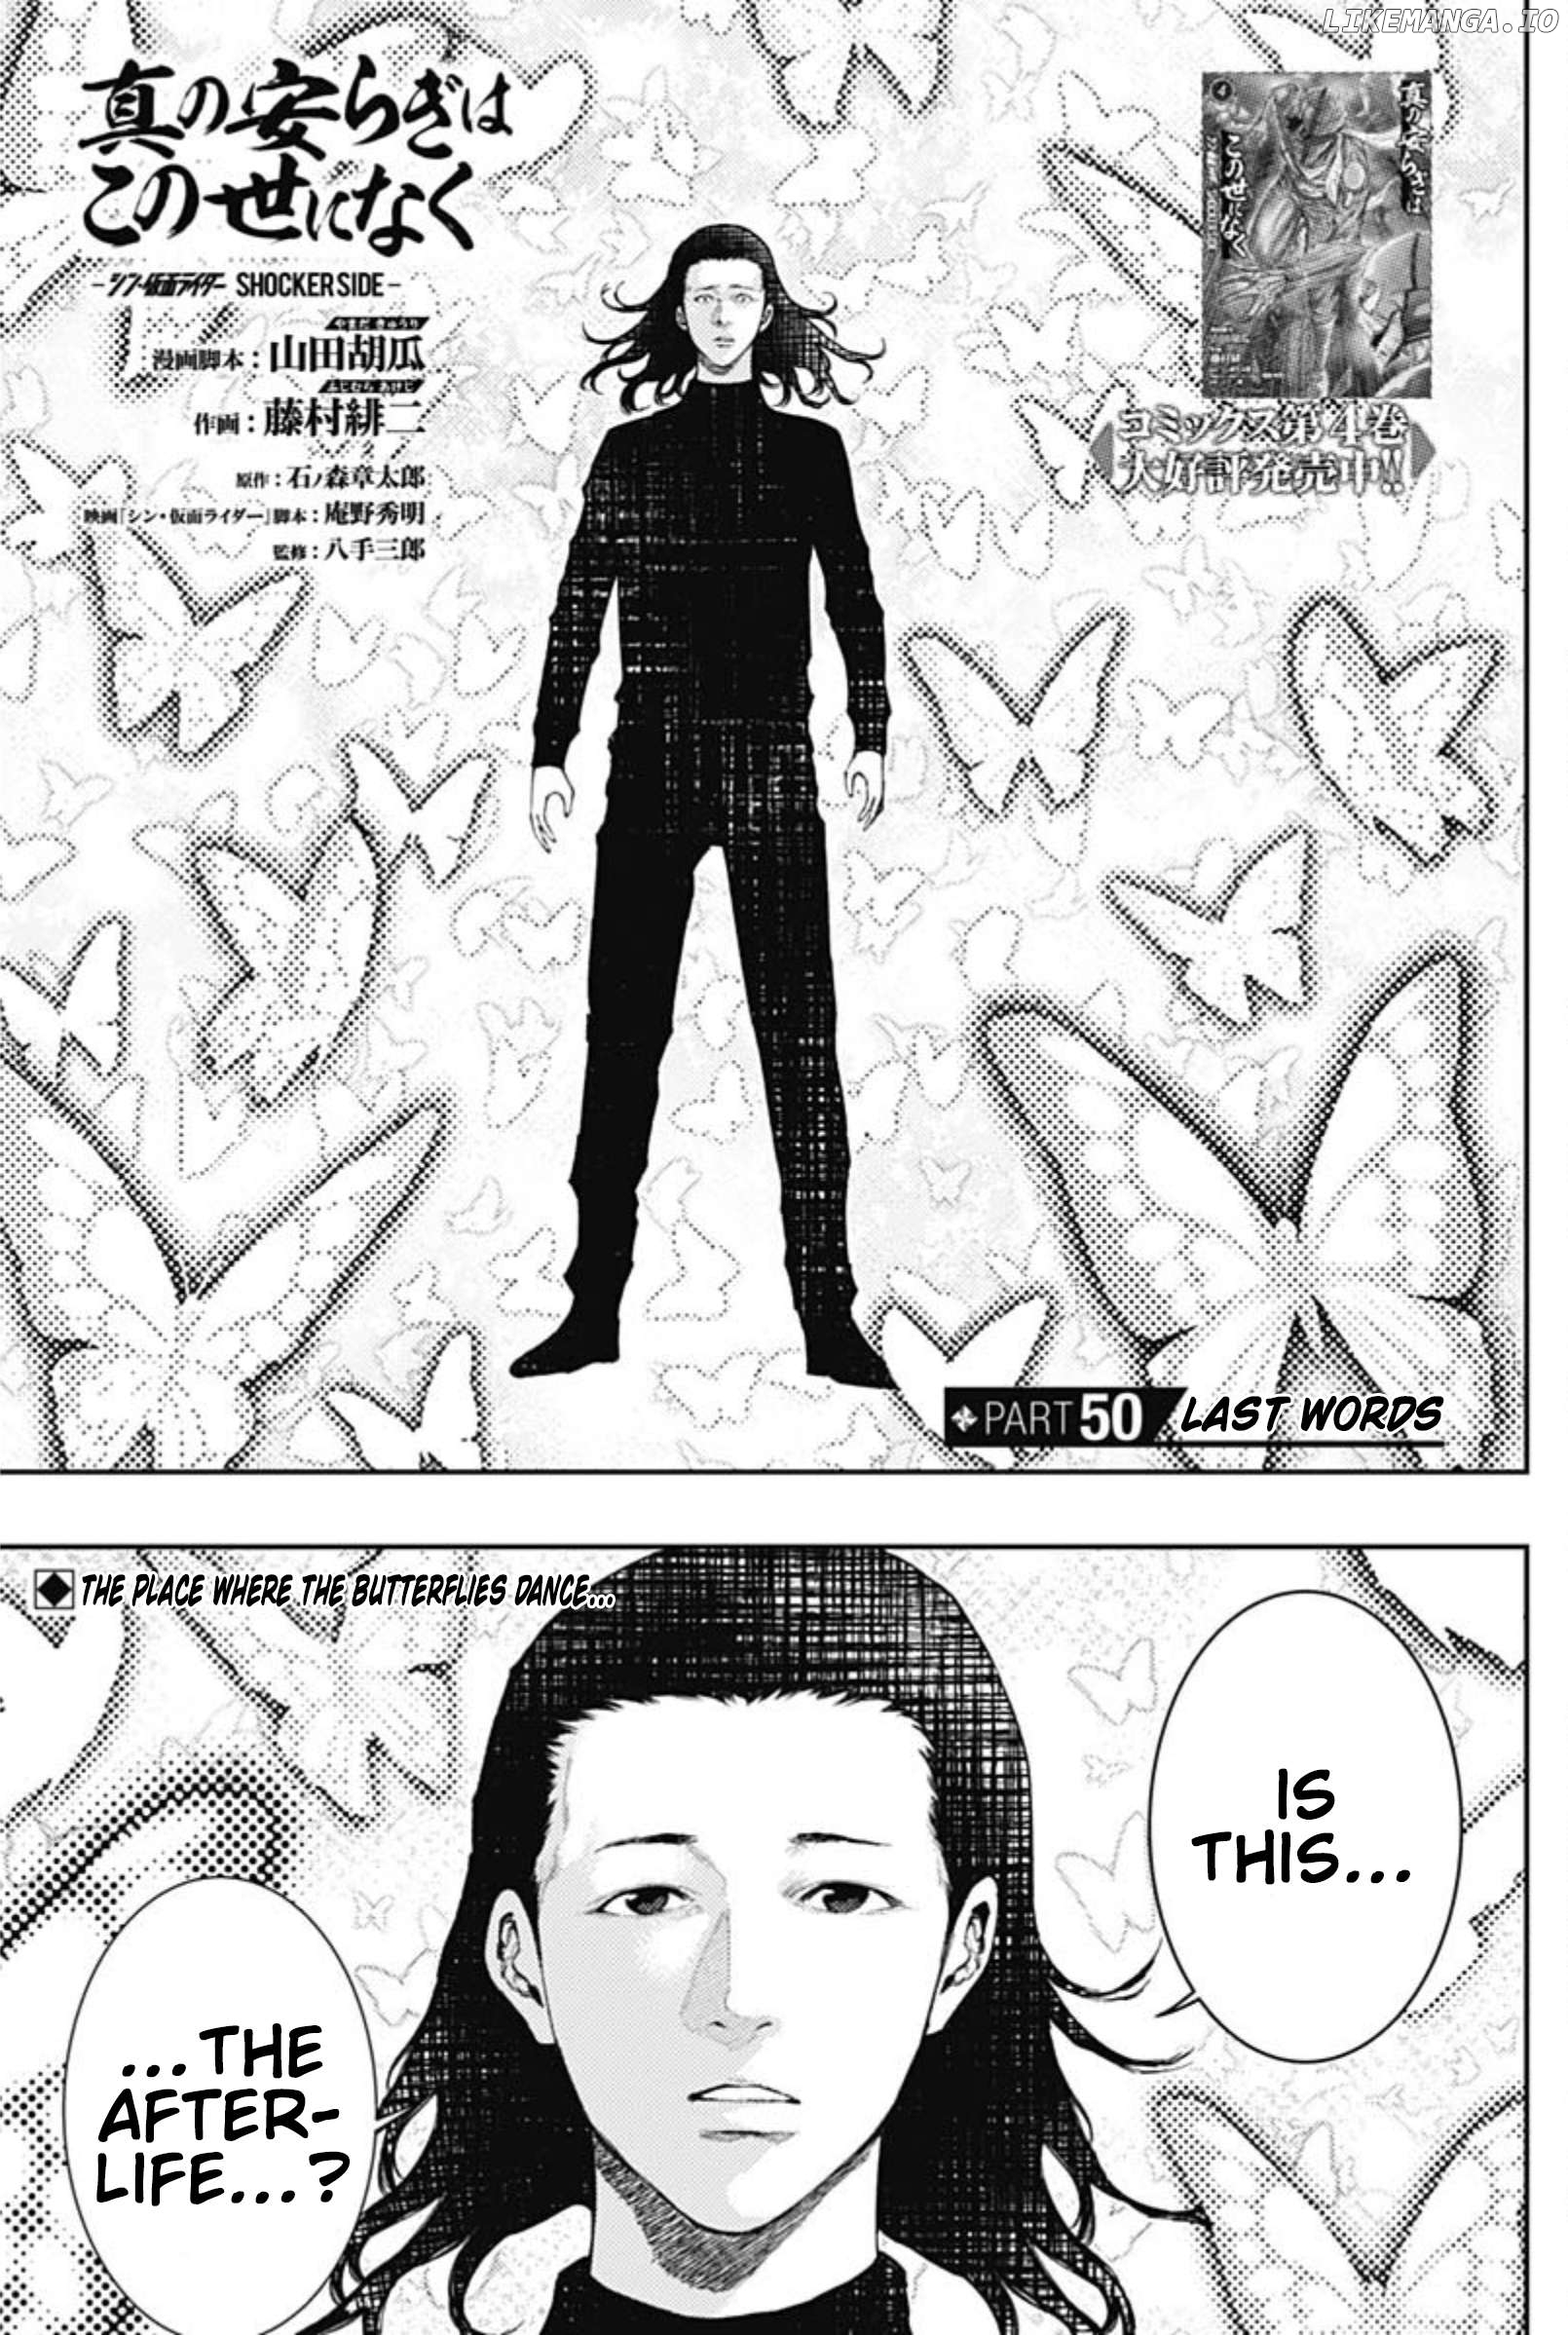 There is no true peace in this world -Shin Kamen Rider SHOCKER SIDE- Chapter 50 - page 1